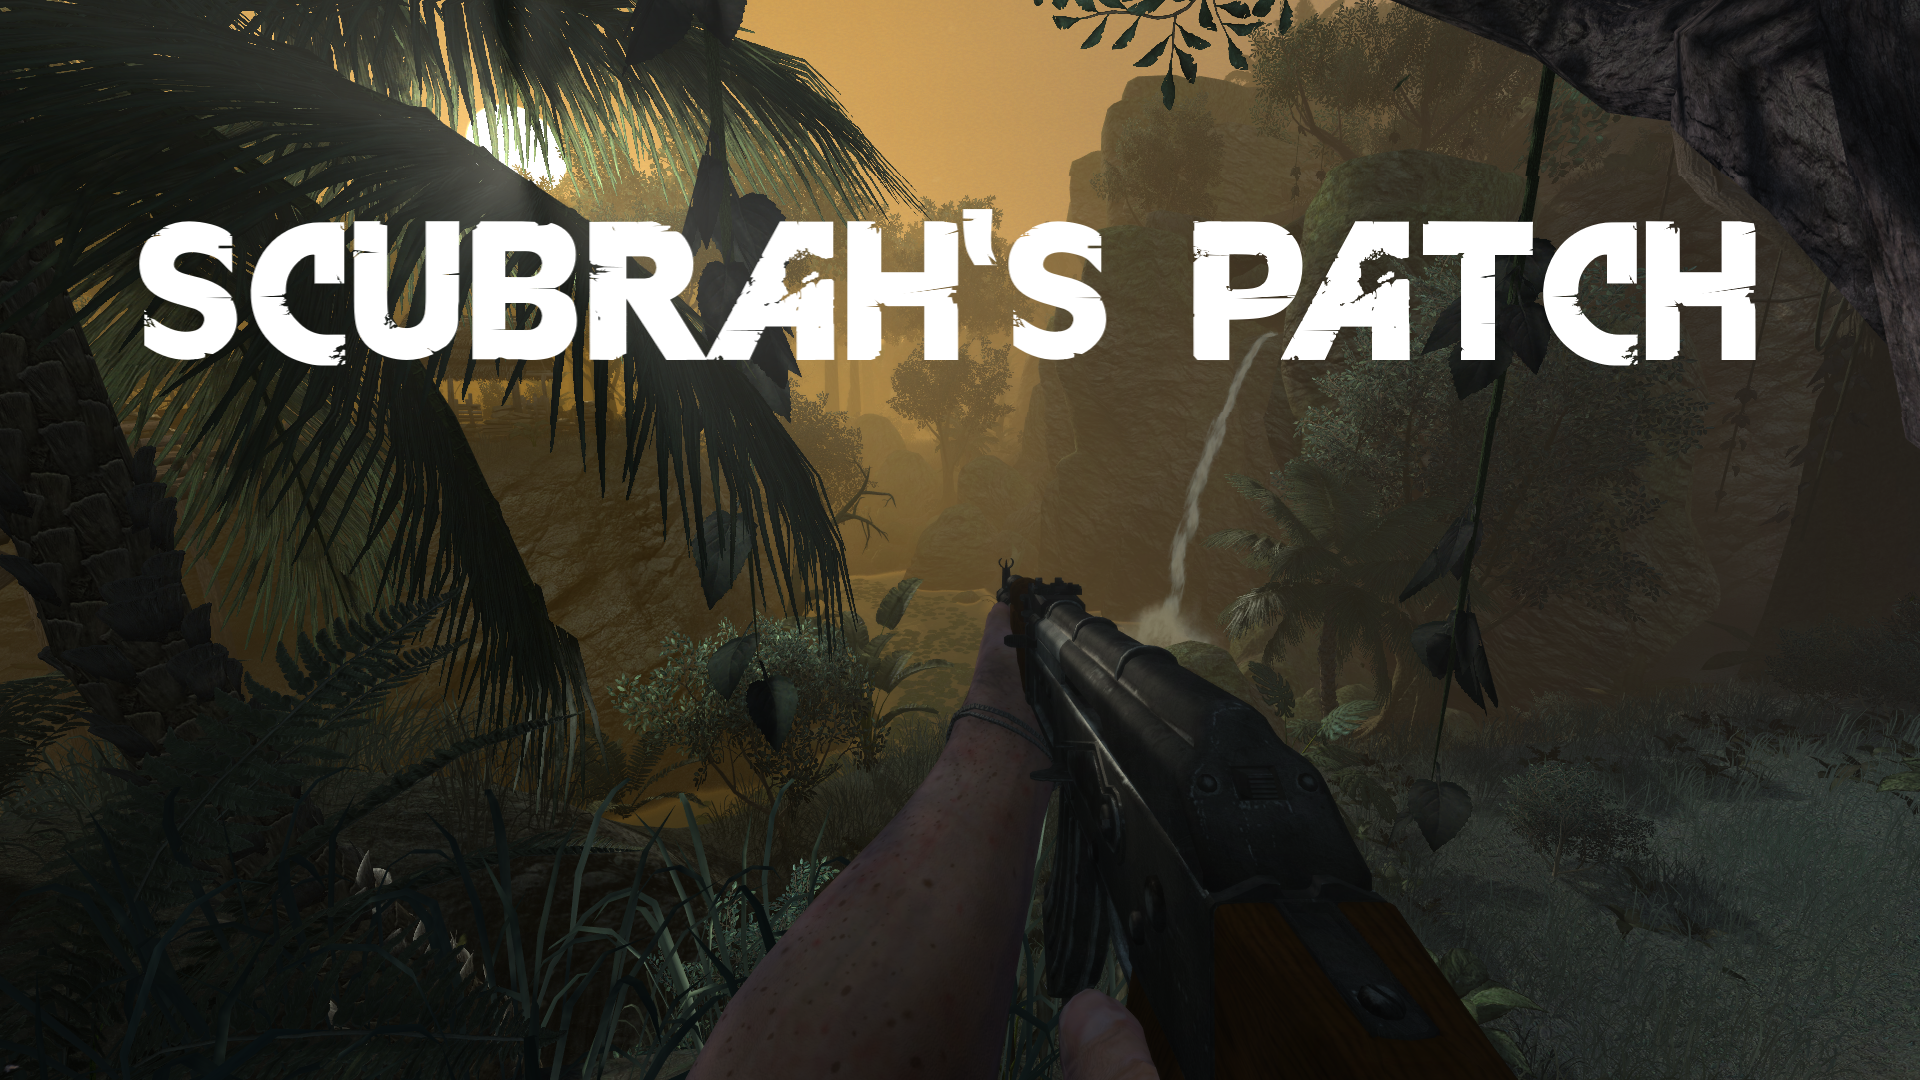 Far Cry 2 gets a new unofficial patch, packing gameplay tweaks & fixes